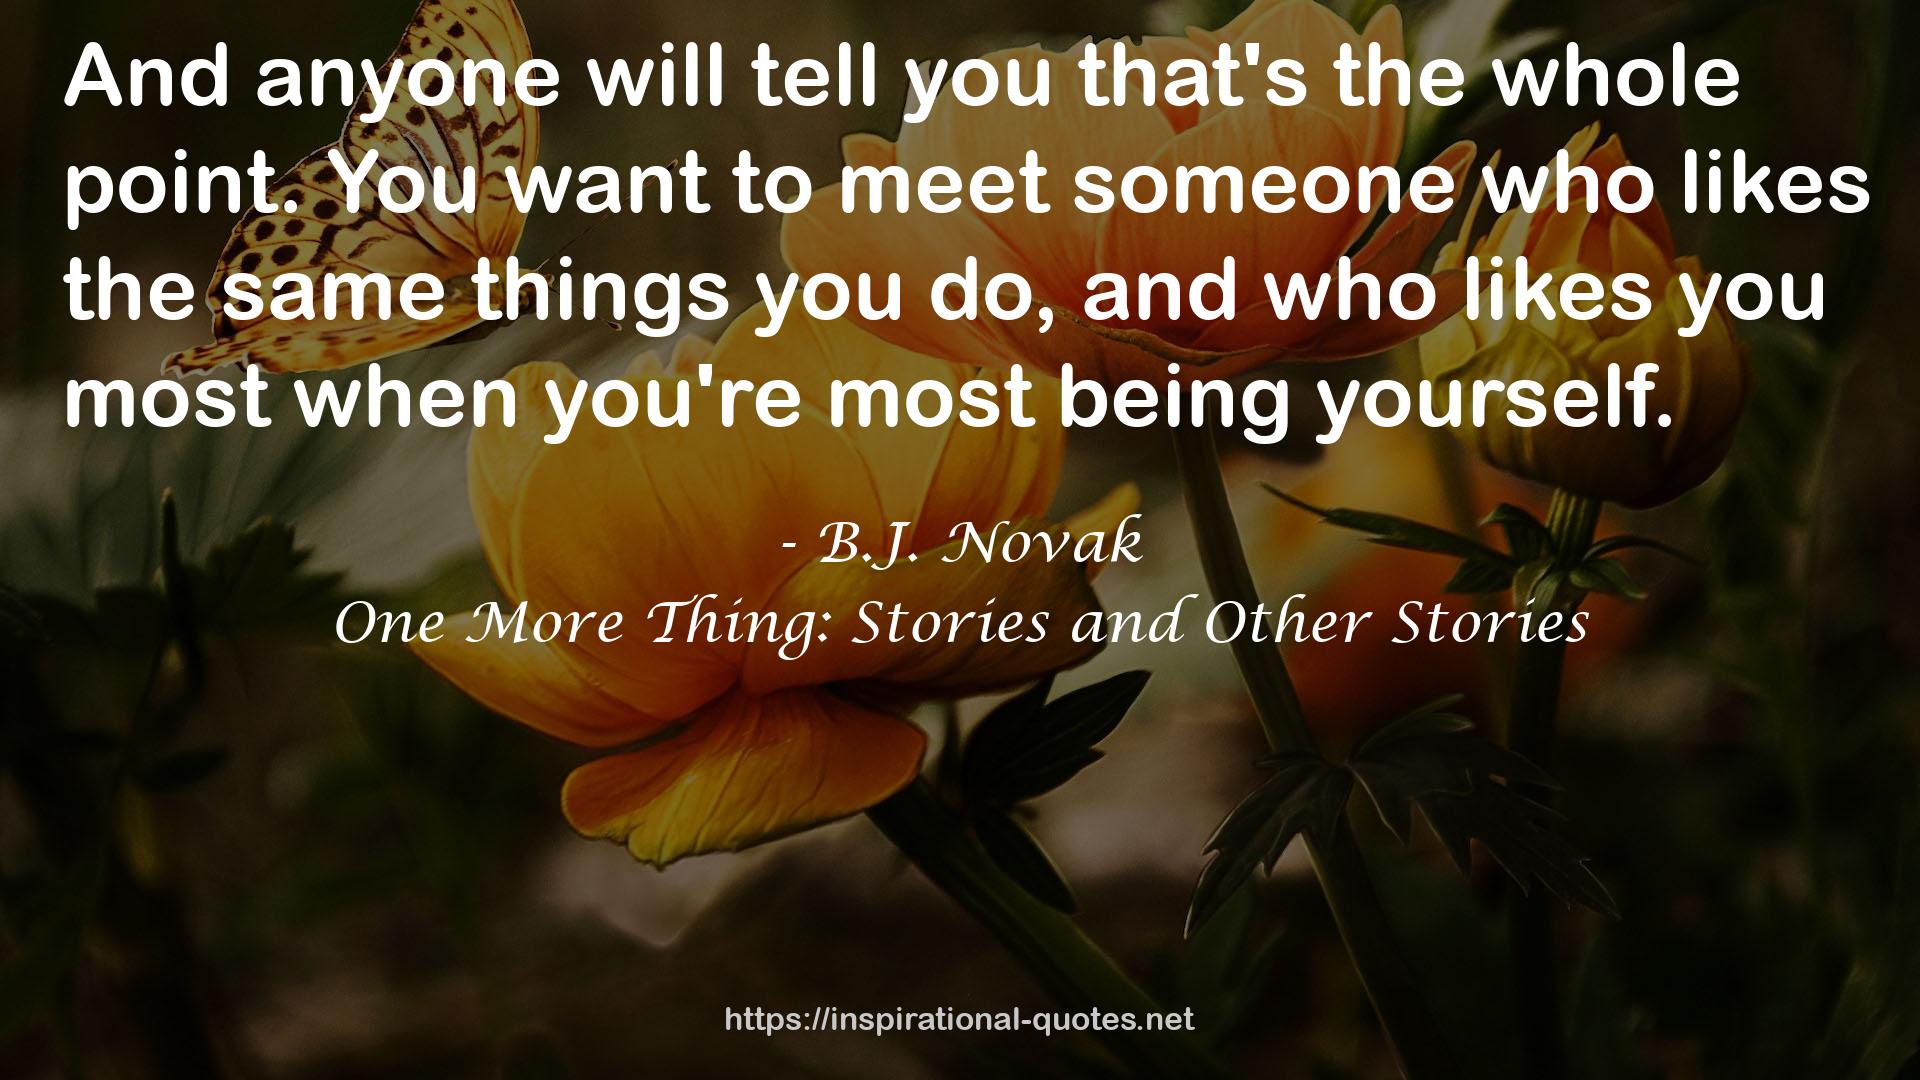 One More Thing: Stories and Other Stories QUOTES